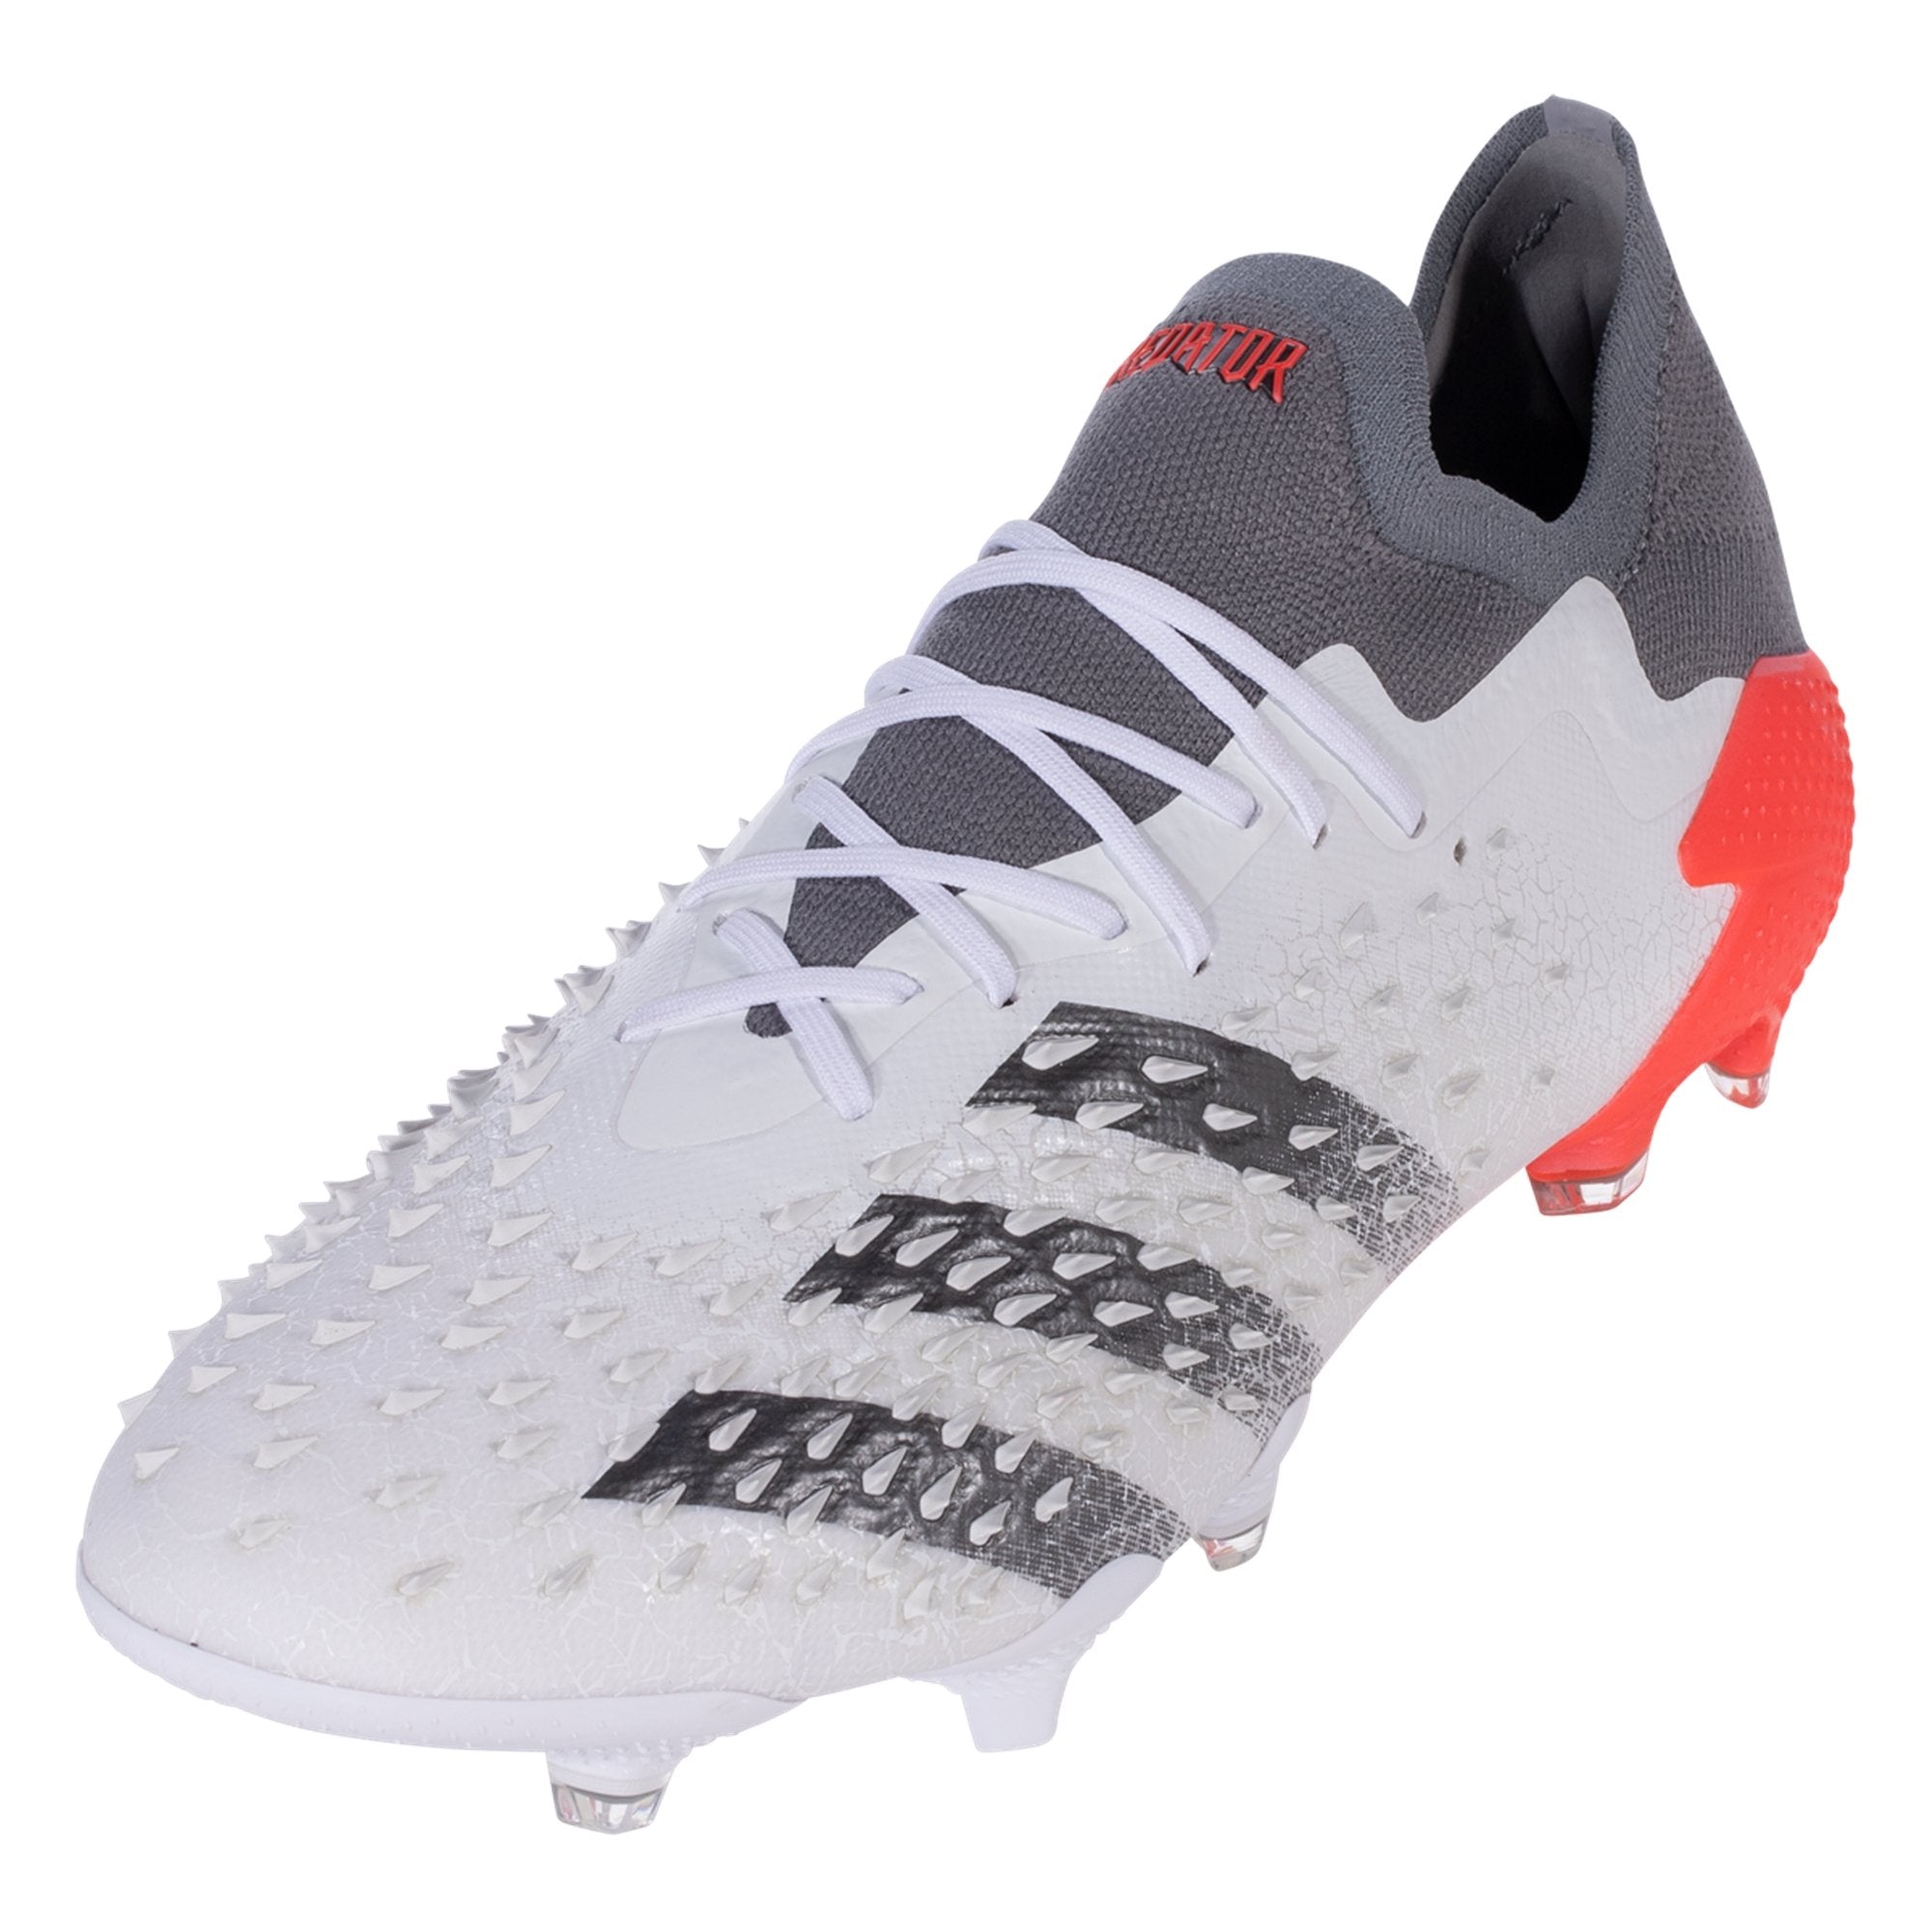 adidas Predator Freak .1 LOW Firm Ground Soccer Cleat - Red/Core  Black/Solar Red FY6266 – Soccer Zone USA